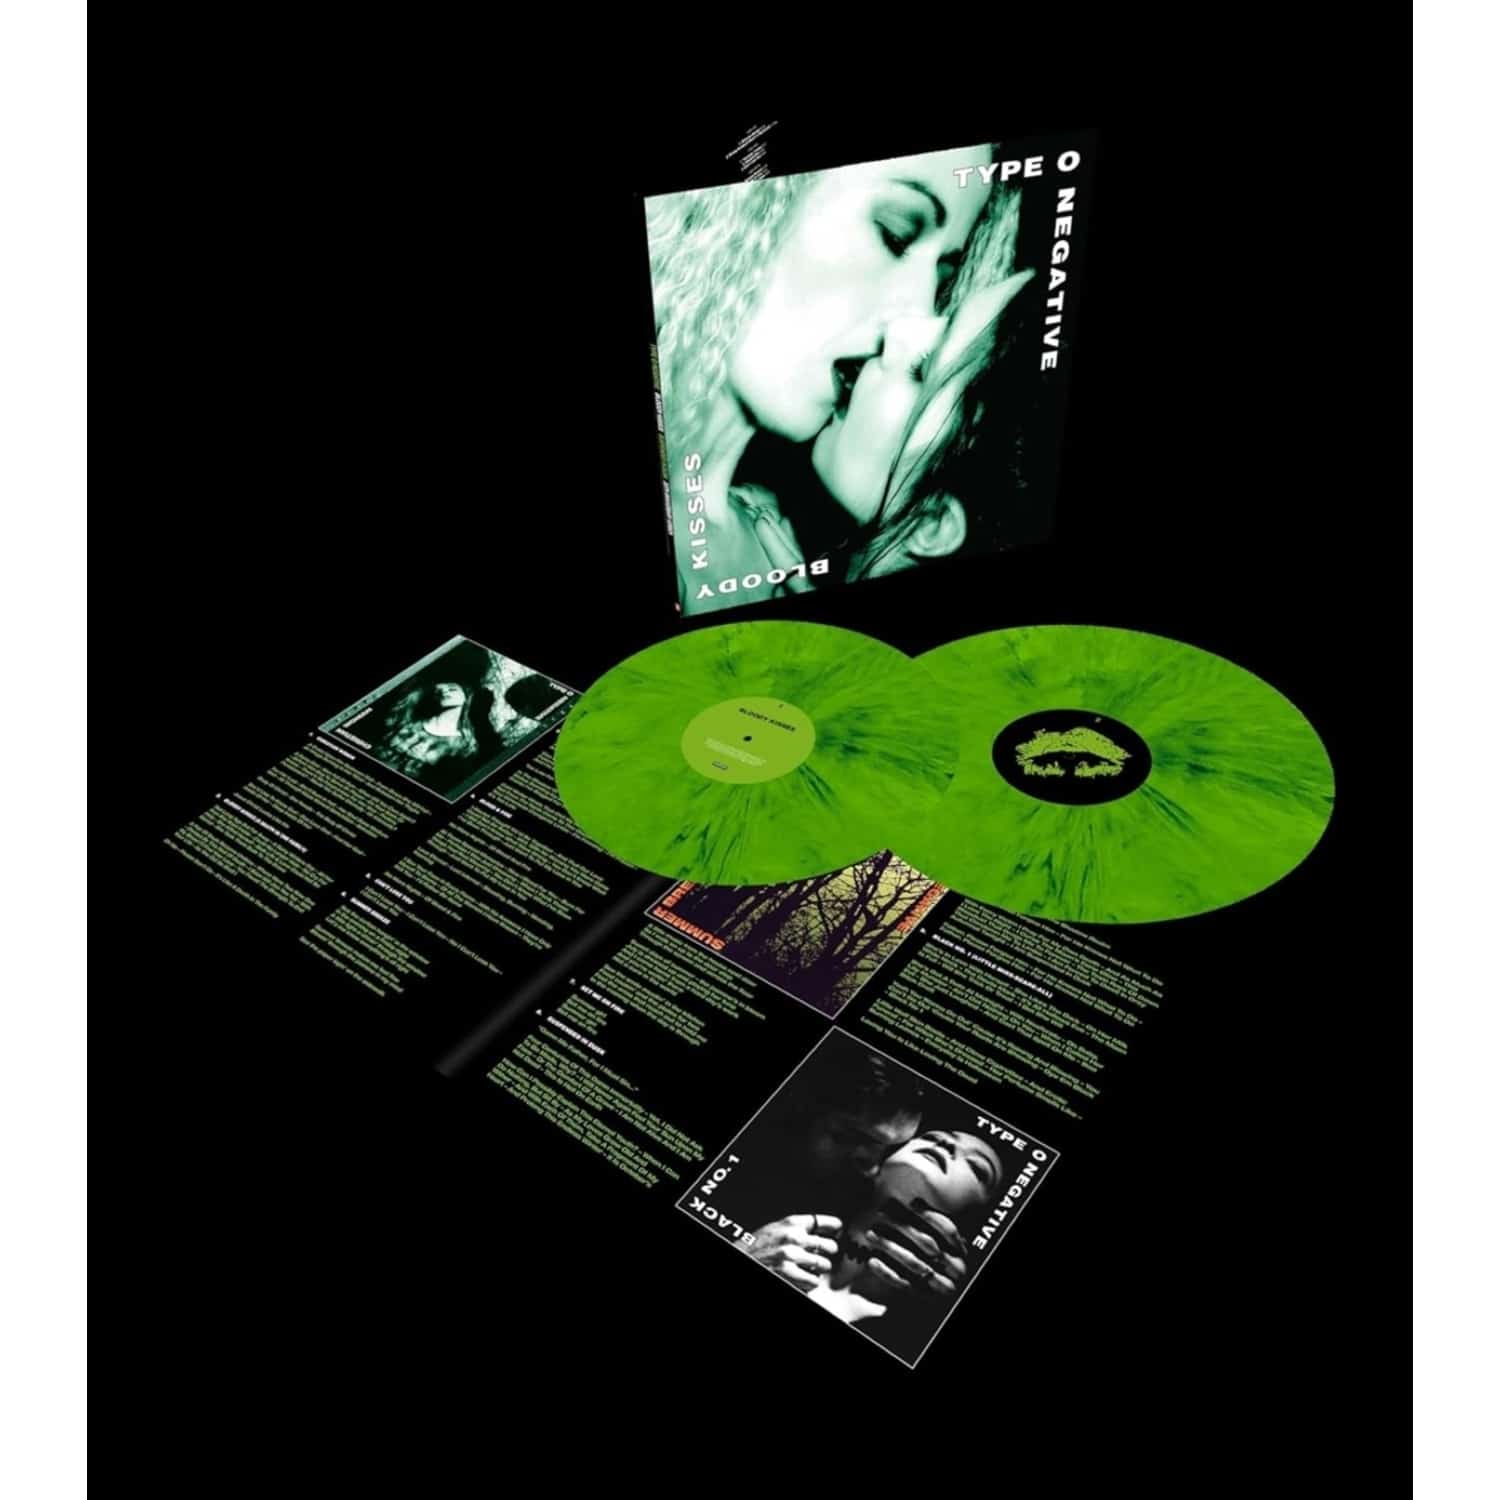 Type O Negative - BLOODY KISSES:SUSPENDED IN DUSK 30TH ANNIVERSARY 